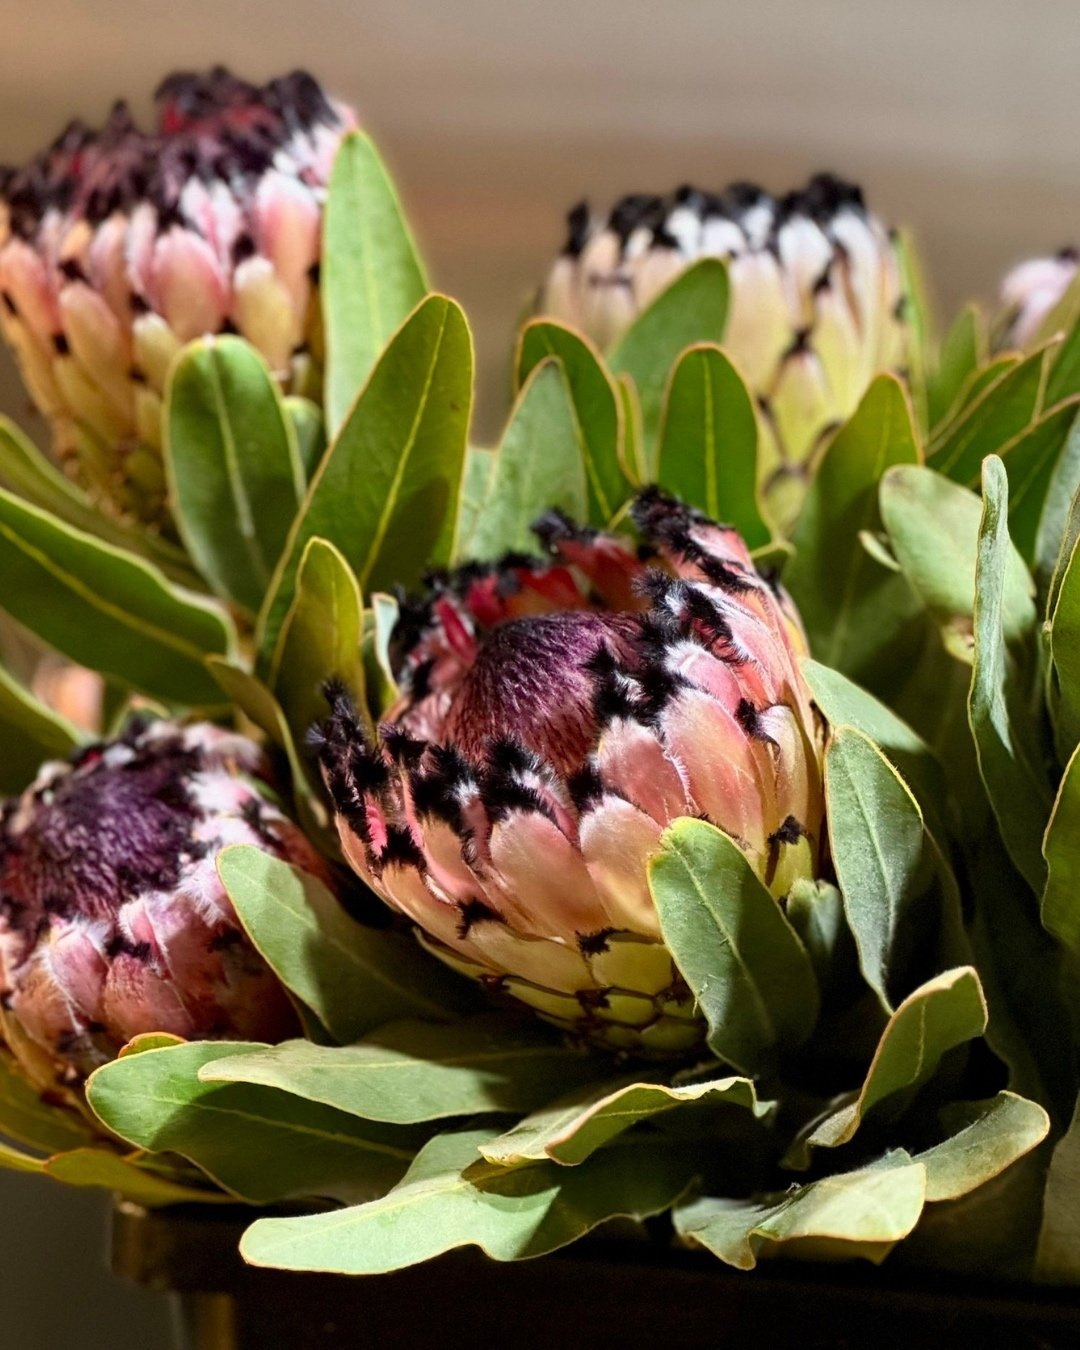 THE QUEEN IS HERE 💐

These gorgeous natives are in season and we have plenty to go around!

Head down to Herdie and pick up a bunch this Mother's Day.

.
.
#Churchlands #Mothersday #perthfloristshop #perthflorists
#farmersmarket #giftshopping #fresh